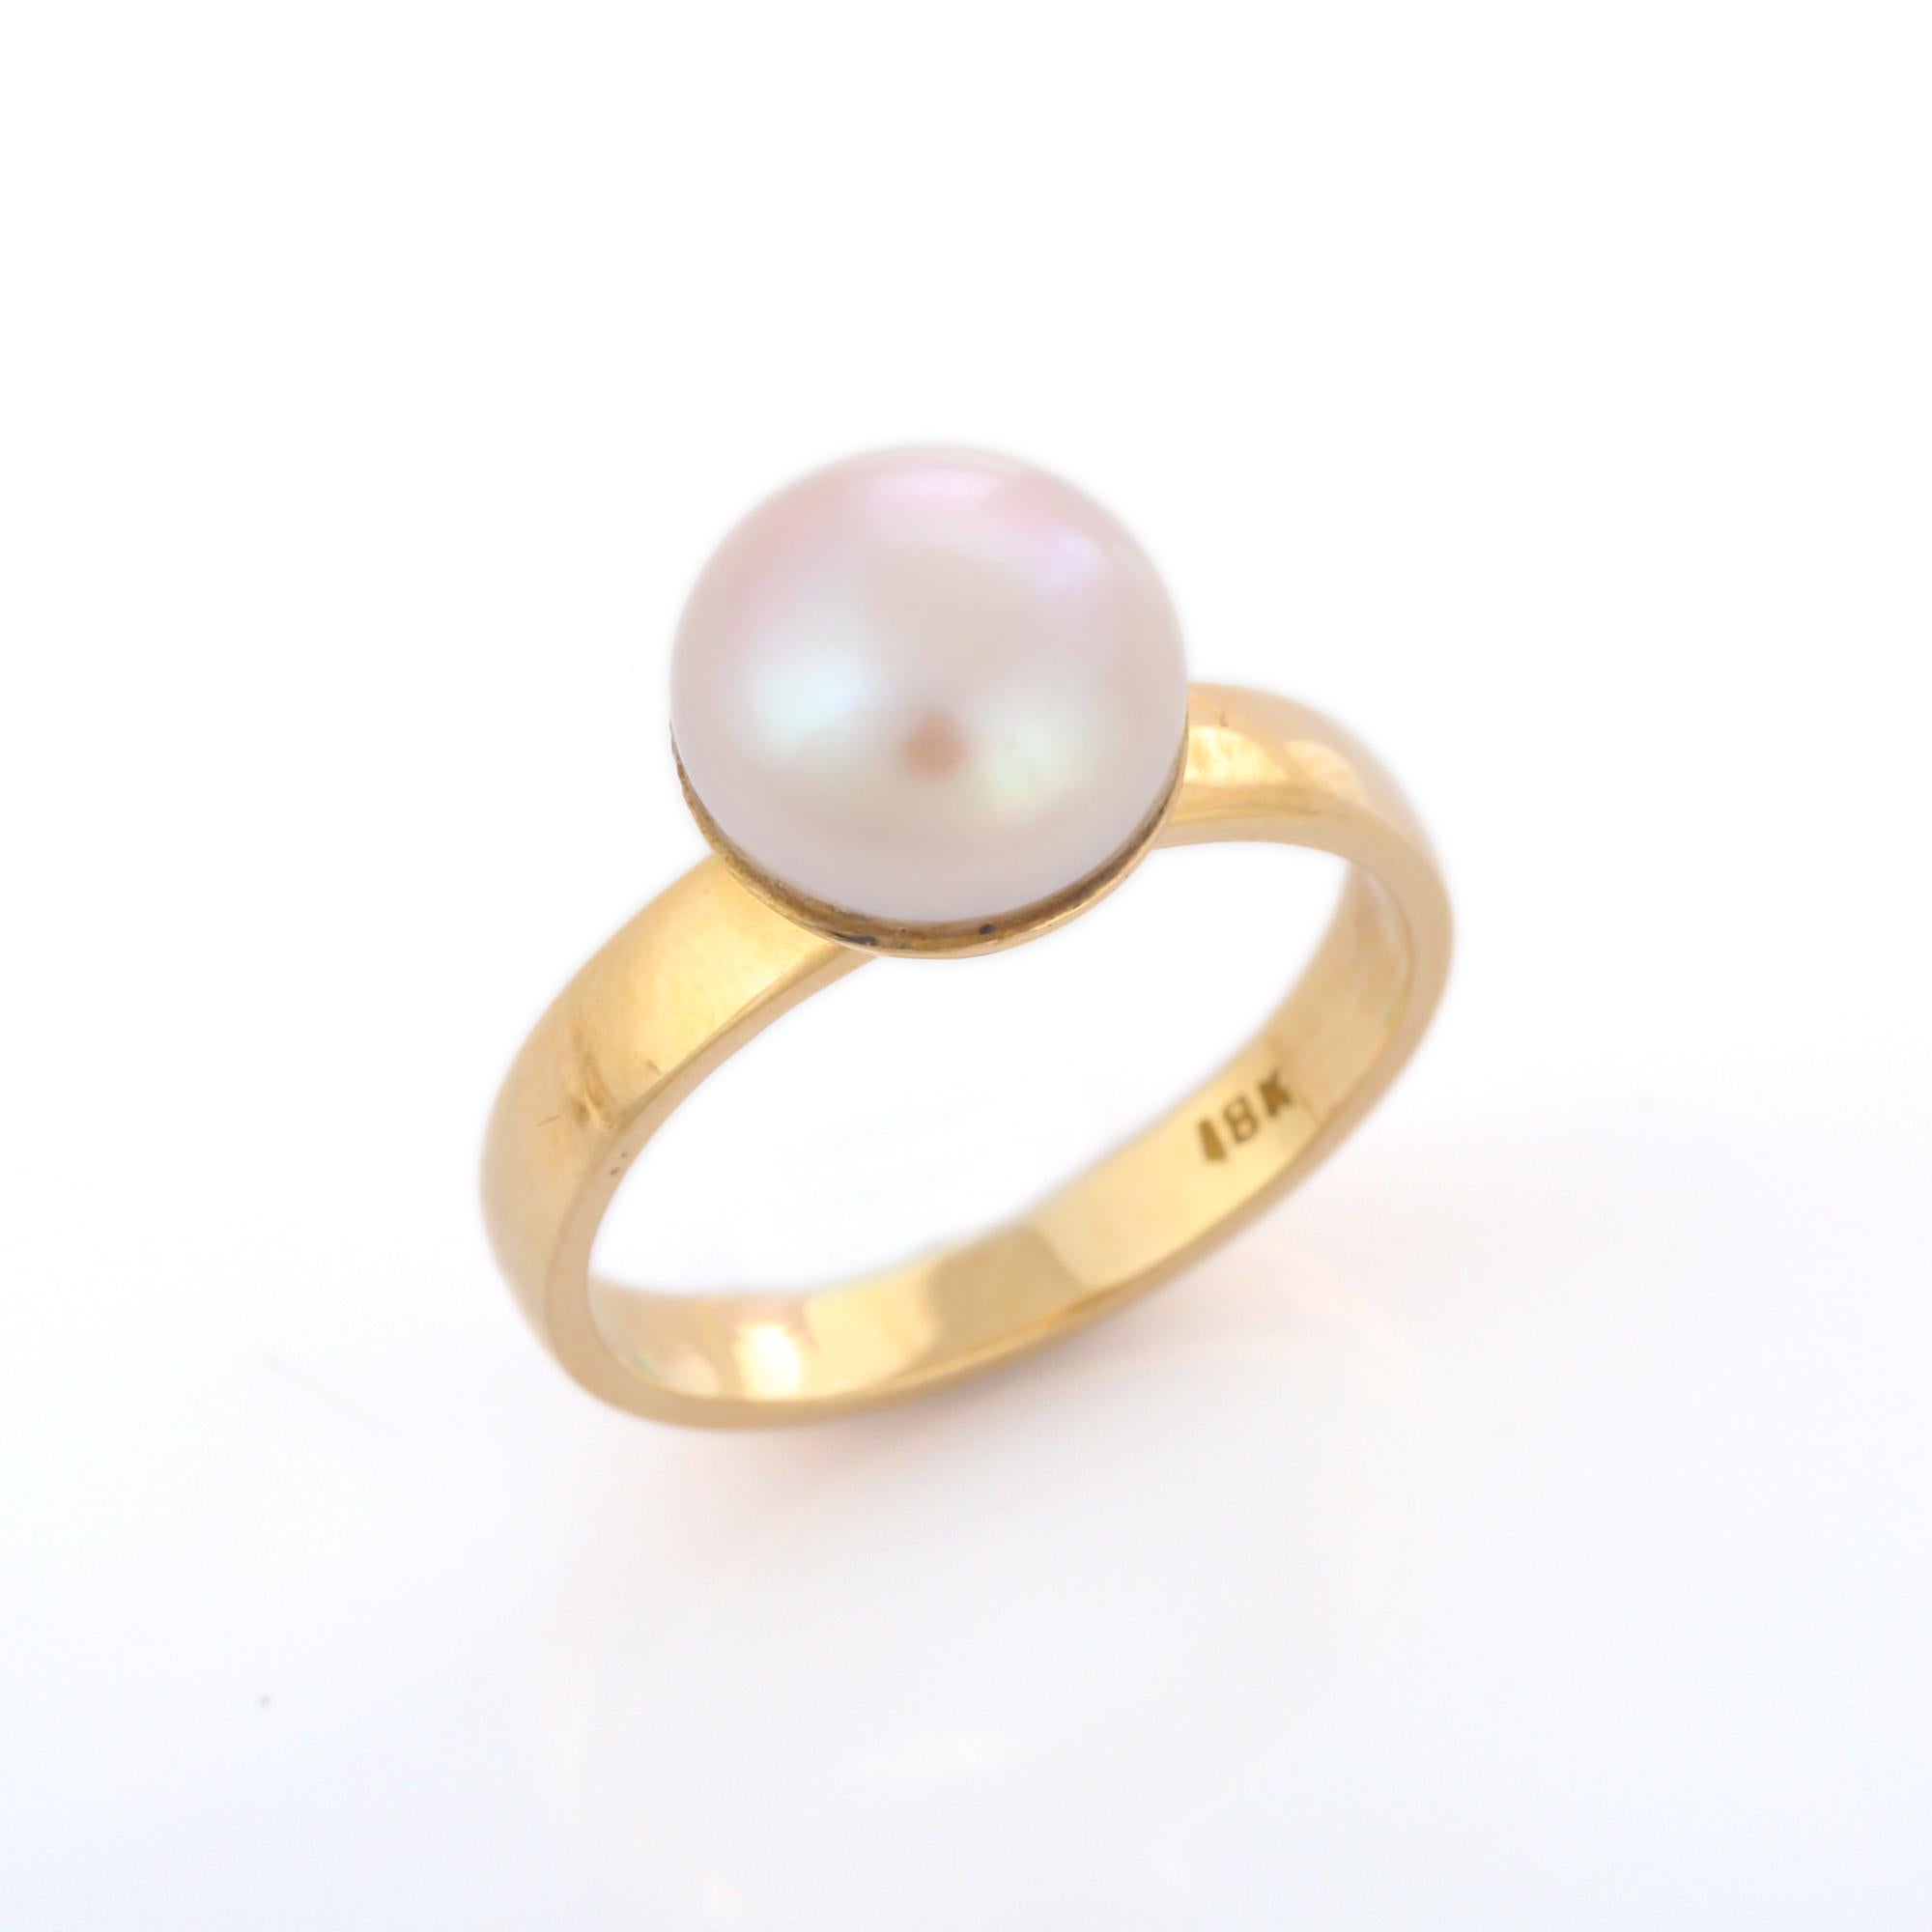 For Sale:  4.3 Carat Pearl Solitaire Ring in 18K Yellow Gold  9